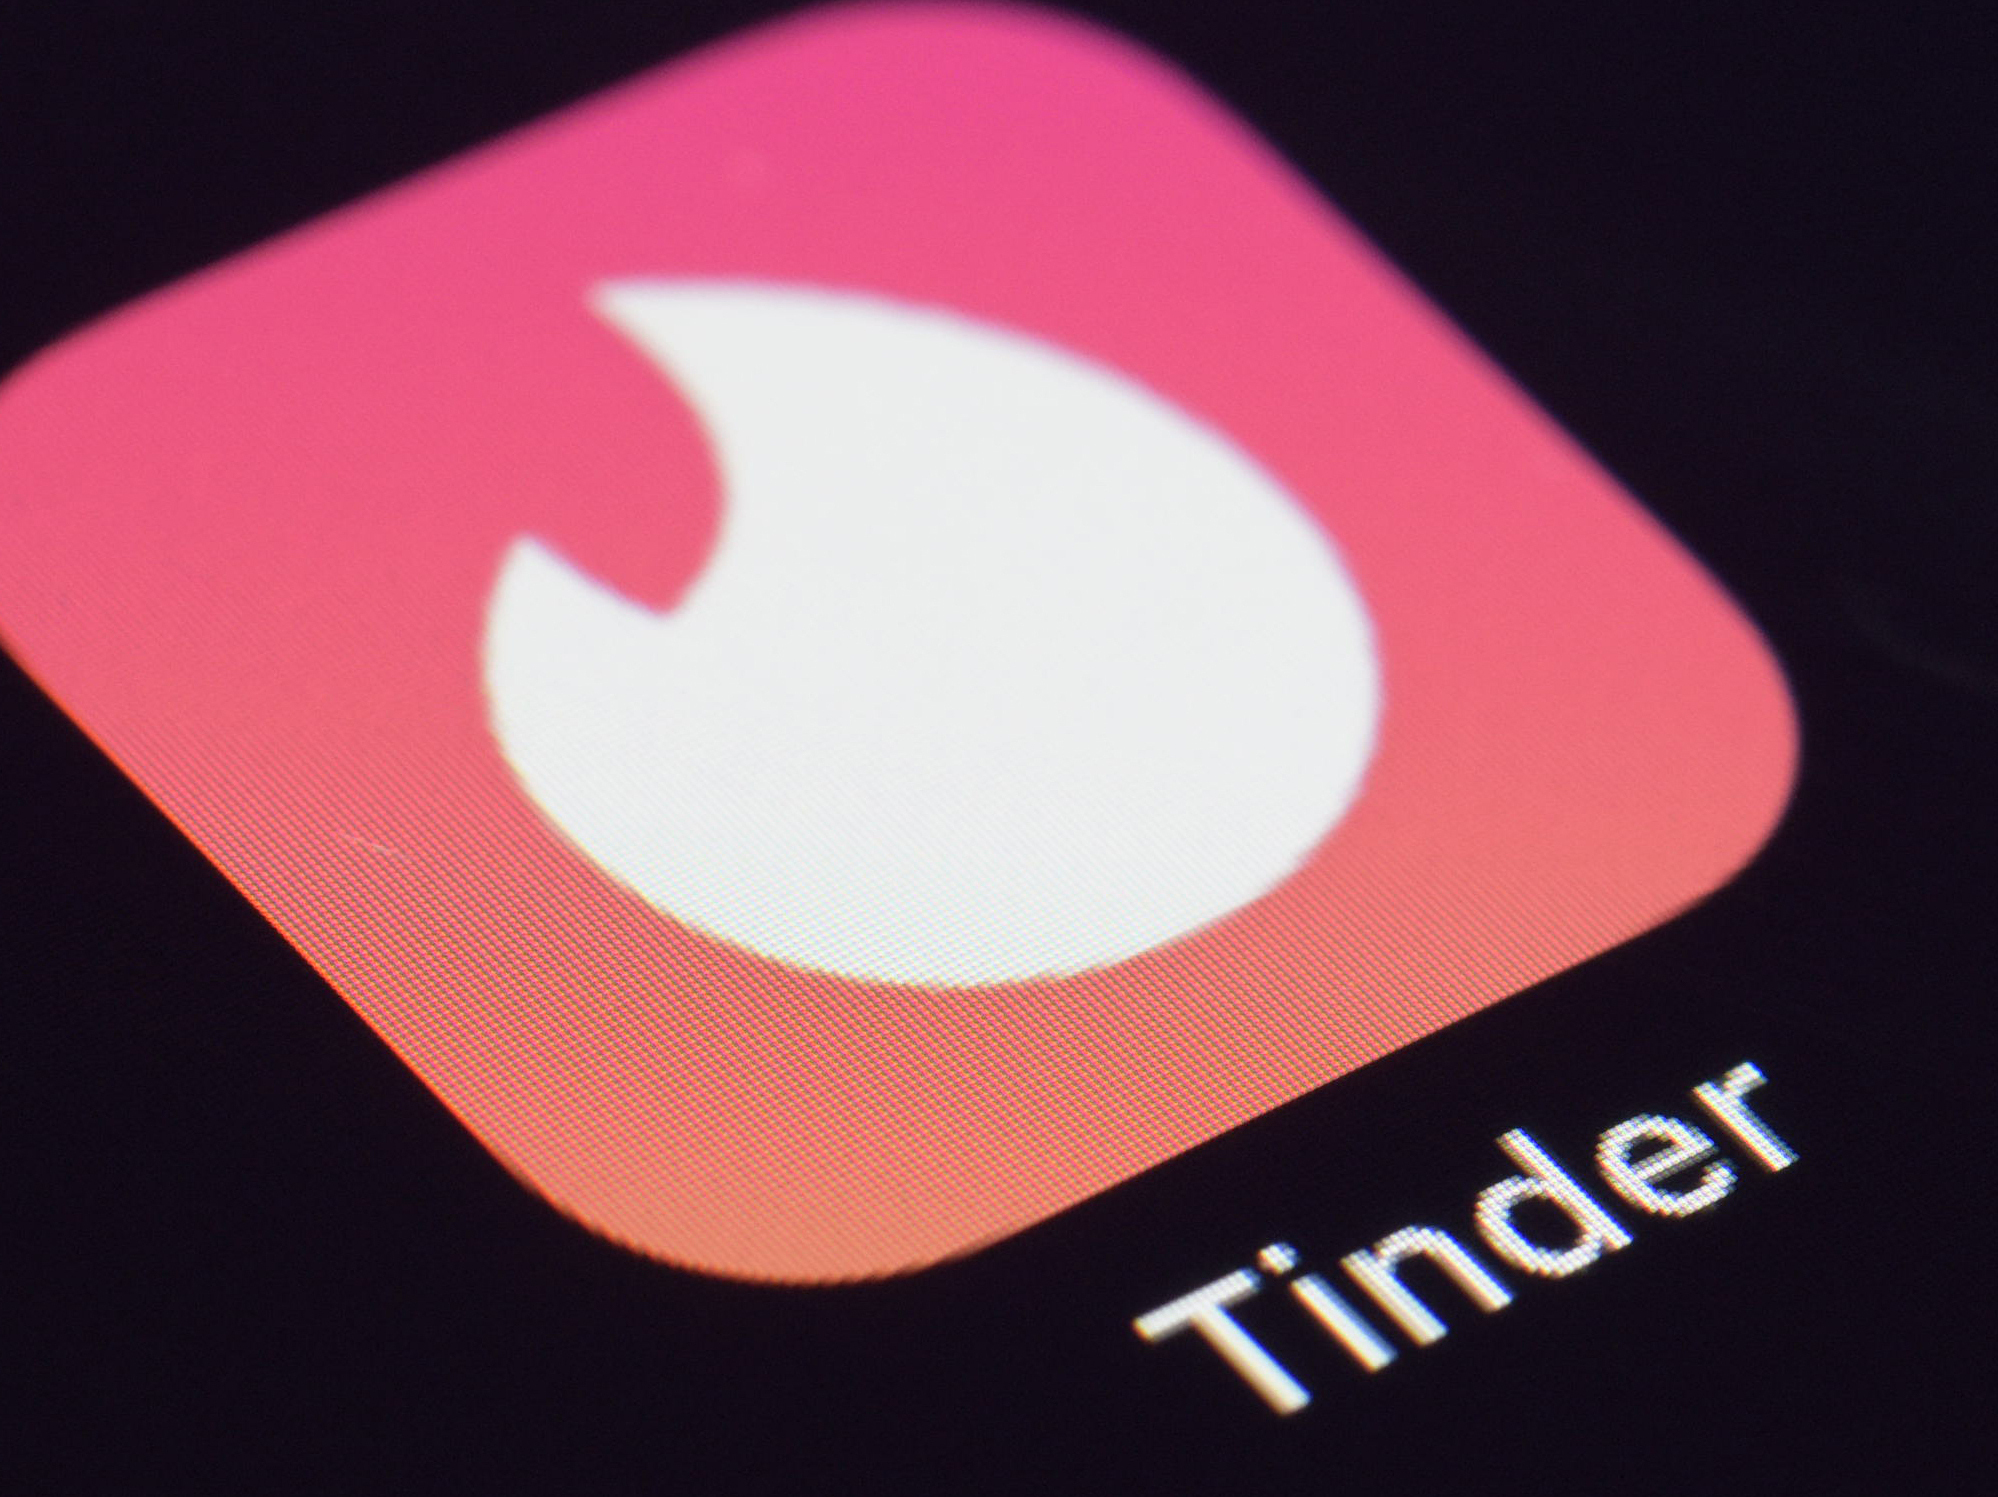 Match Group, which owns dating apps including Tinder and Hinge, was sued on Wednesday in a suit claiming the apps are designed to hook users so the company to make more profit, rather than helping people find romantic partners.